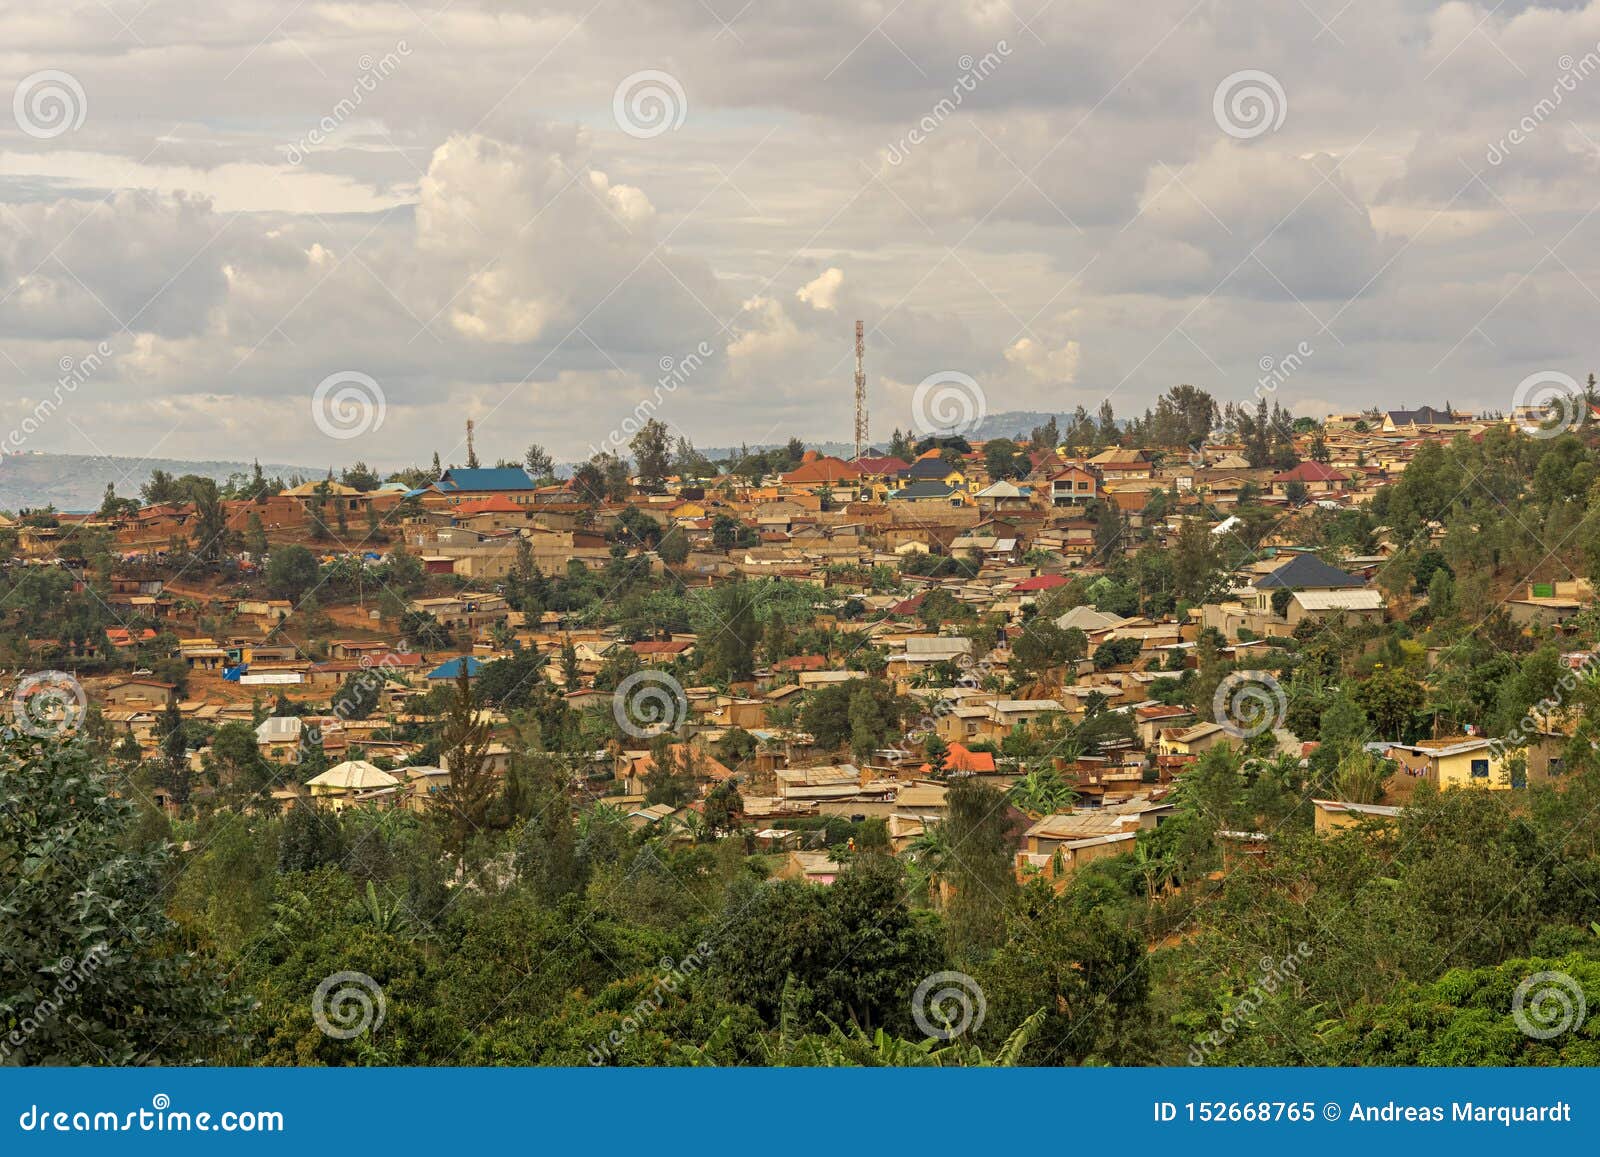 this is gikondo,a part of kigali